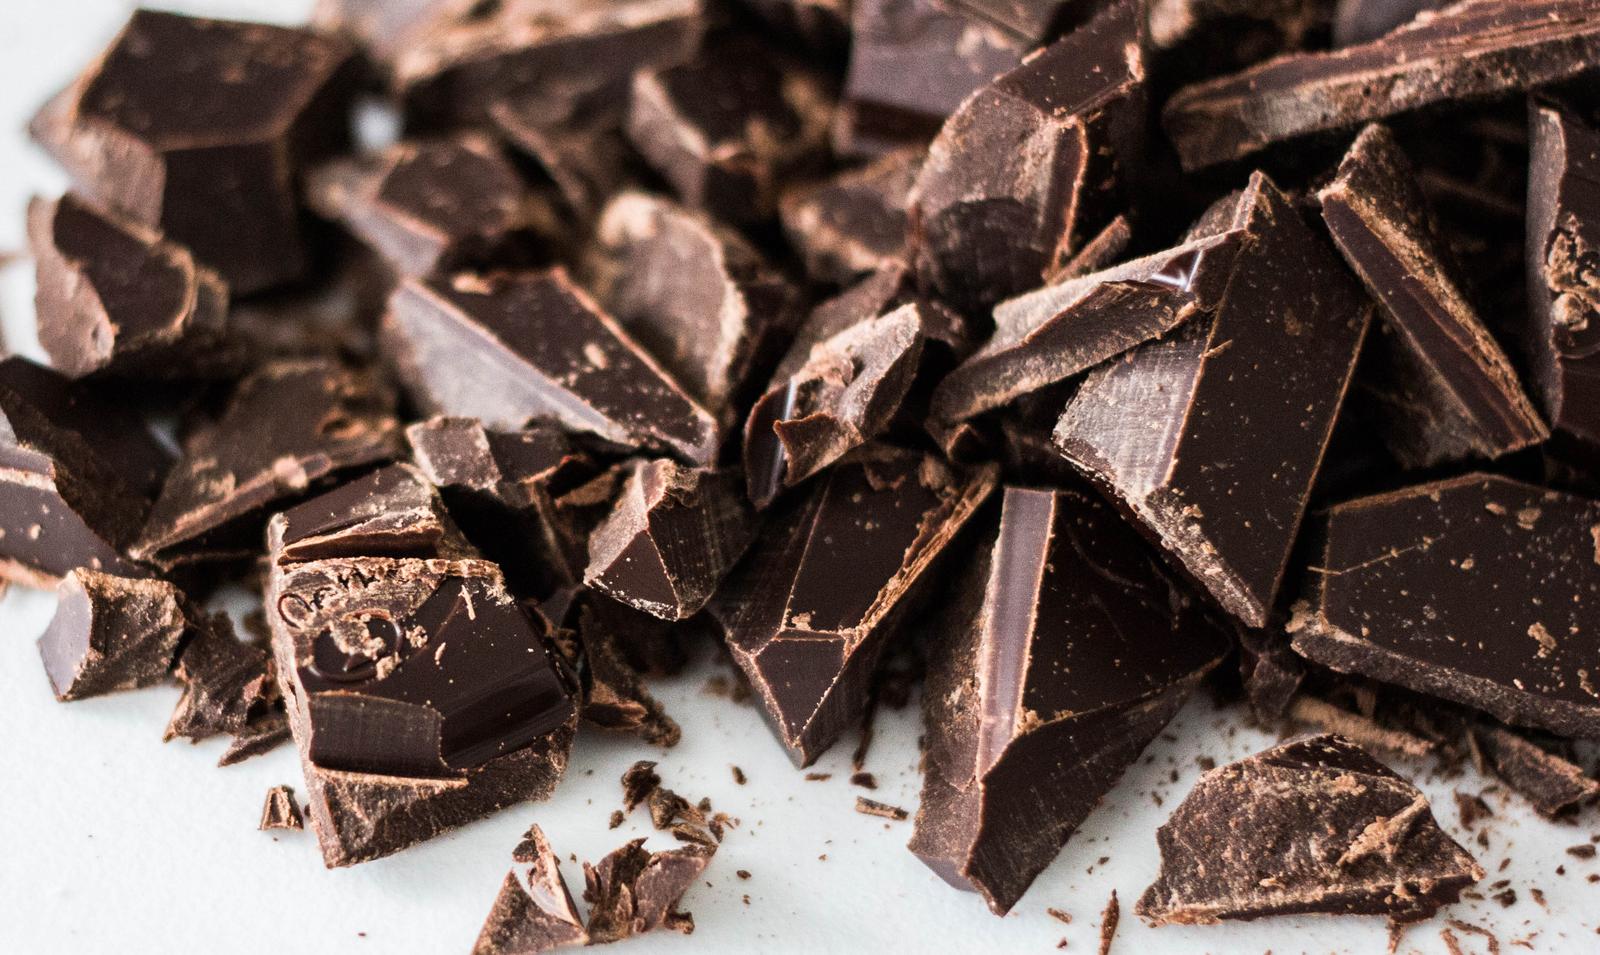 Grab Some Food at This All-Day Buffet to Find Out What People Secretly Dislike About You Dark chocolate